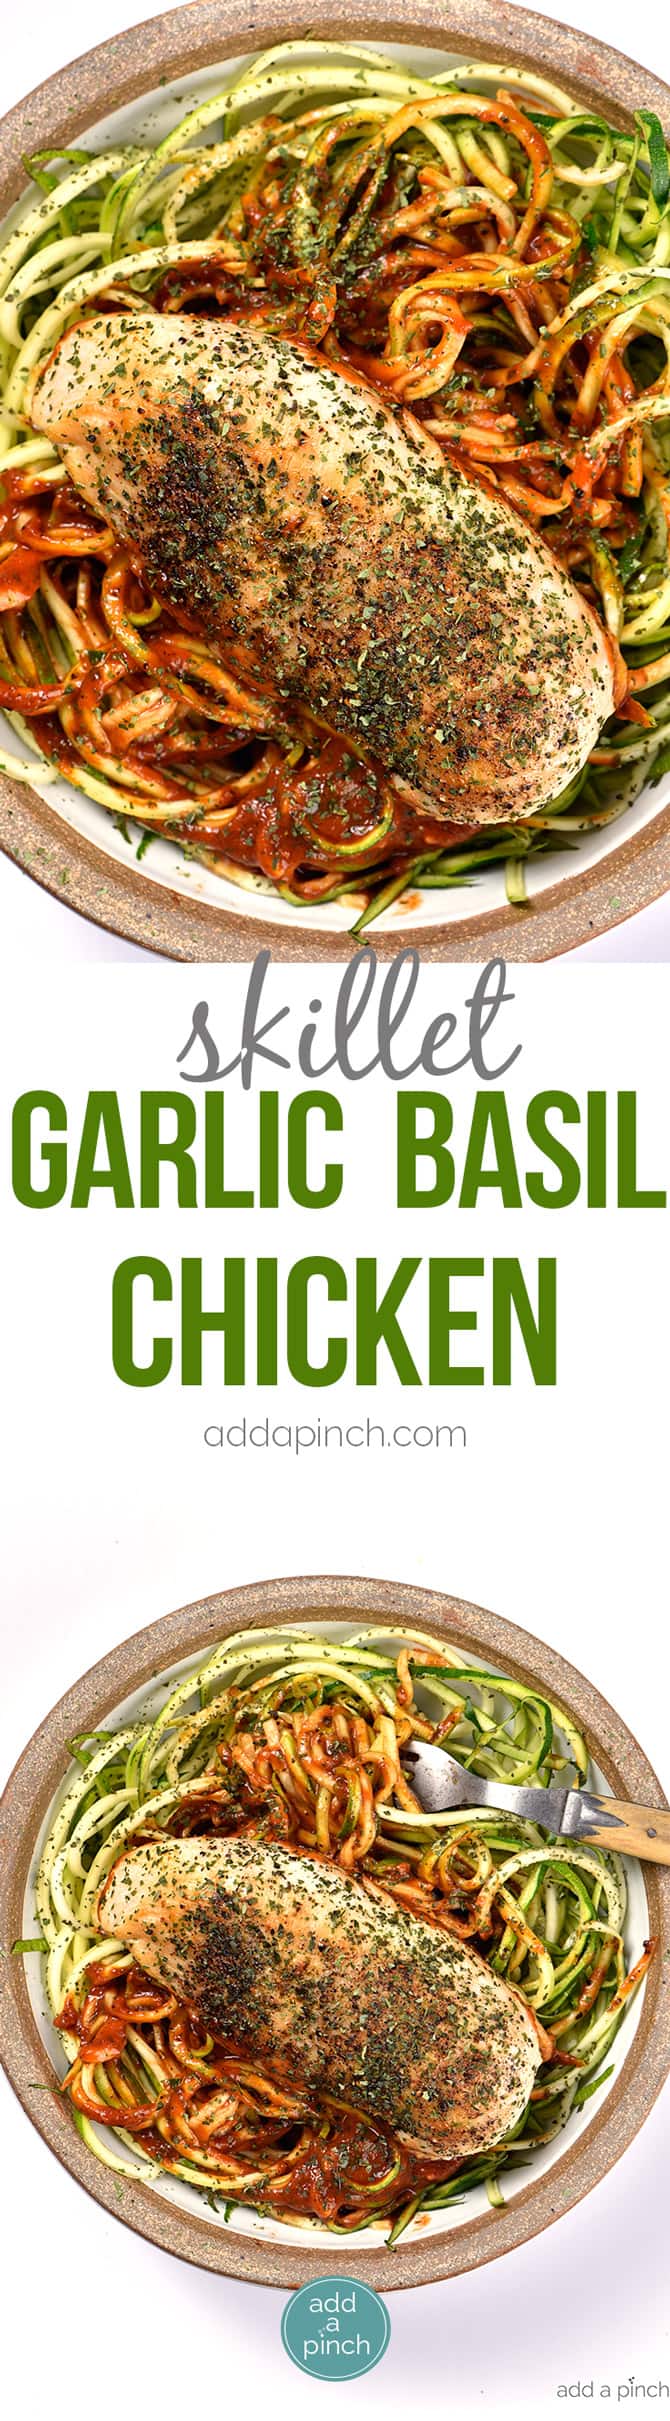 Skillet Garlic Basil Chicken Recipe - This quick and easy, one skillet Garlic Basil Chicken recipe comes together quickly for a fresh, delicious meal the whole family will love! Made with less than 10 ingredients and ready in less than 30 minutes! // addapinch.com